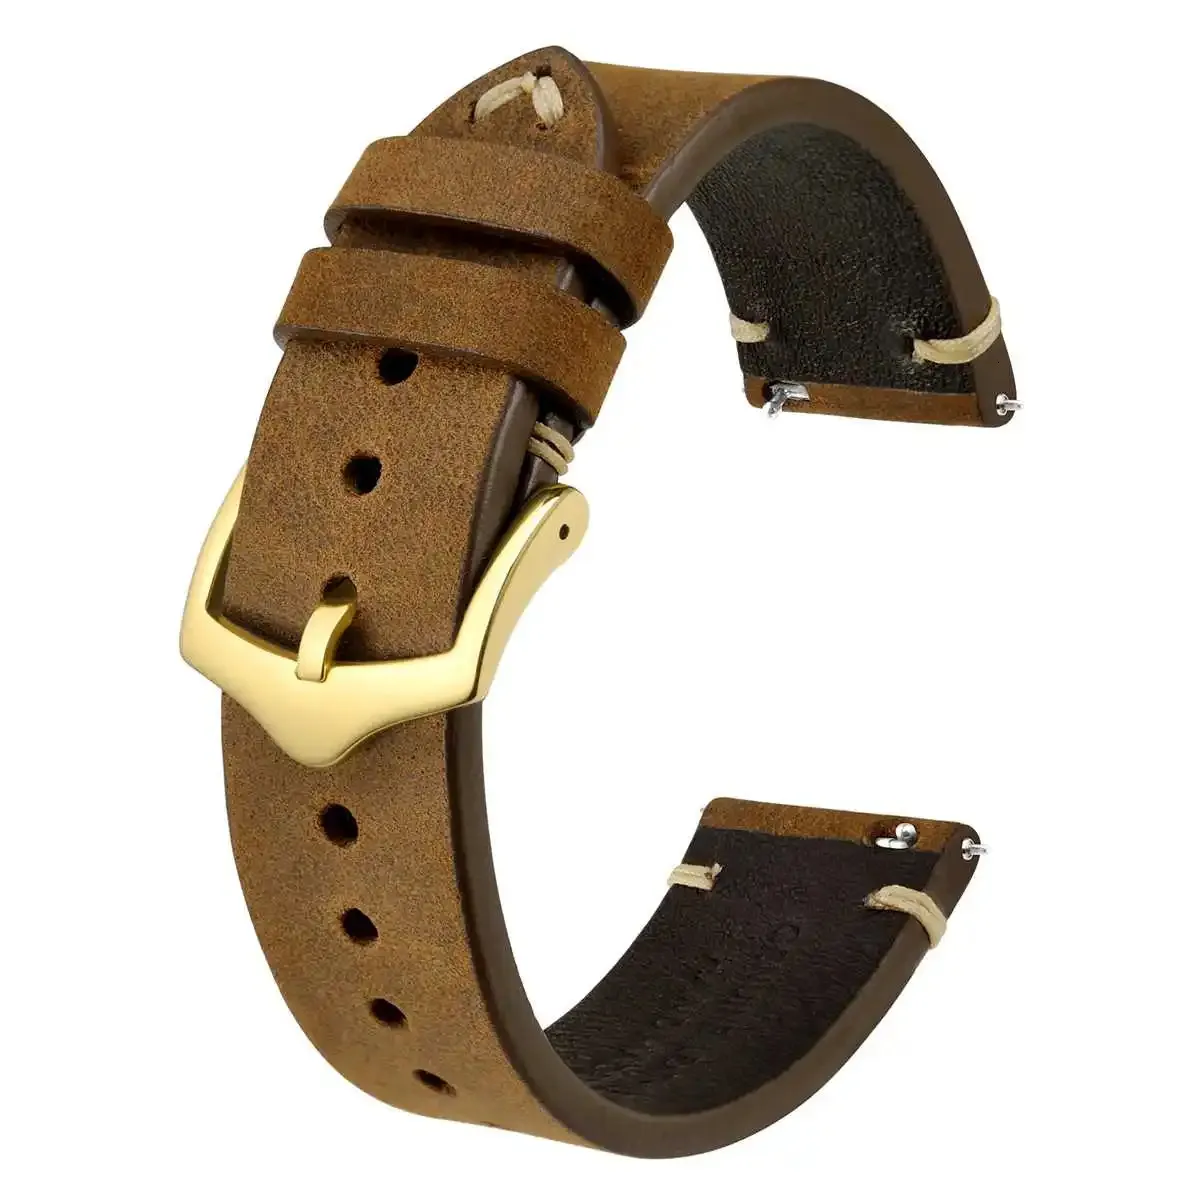 Bisonstrap Crazy Horse Leather Mens Watch Straps Bracelet 18mm 20mm 22mm Black Brown Green with Gold Buckle and Tools Dins 240422